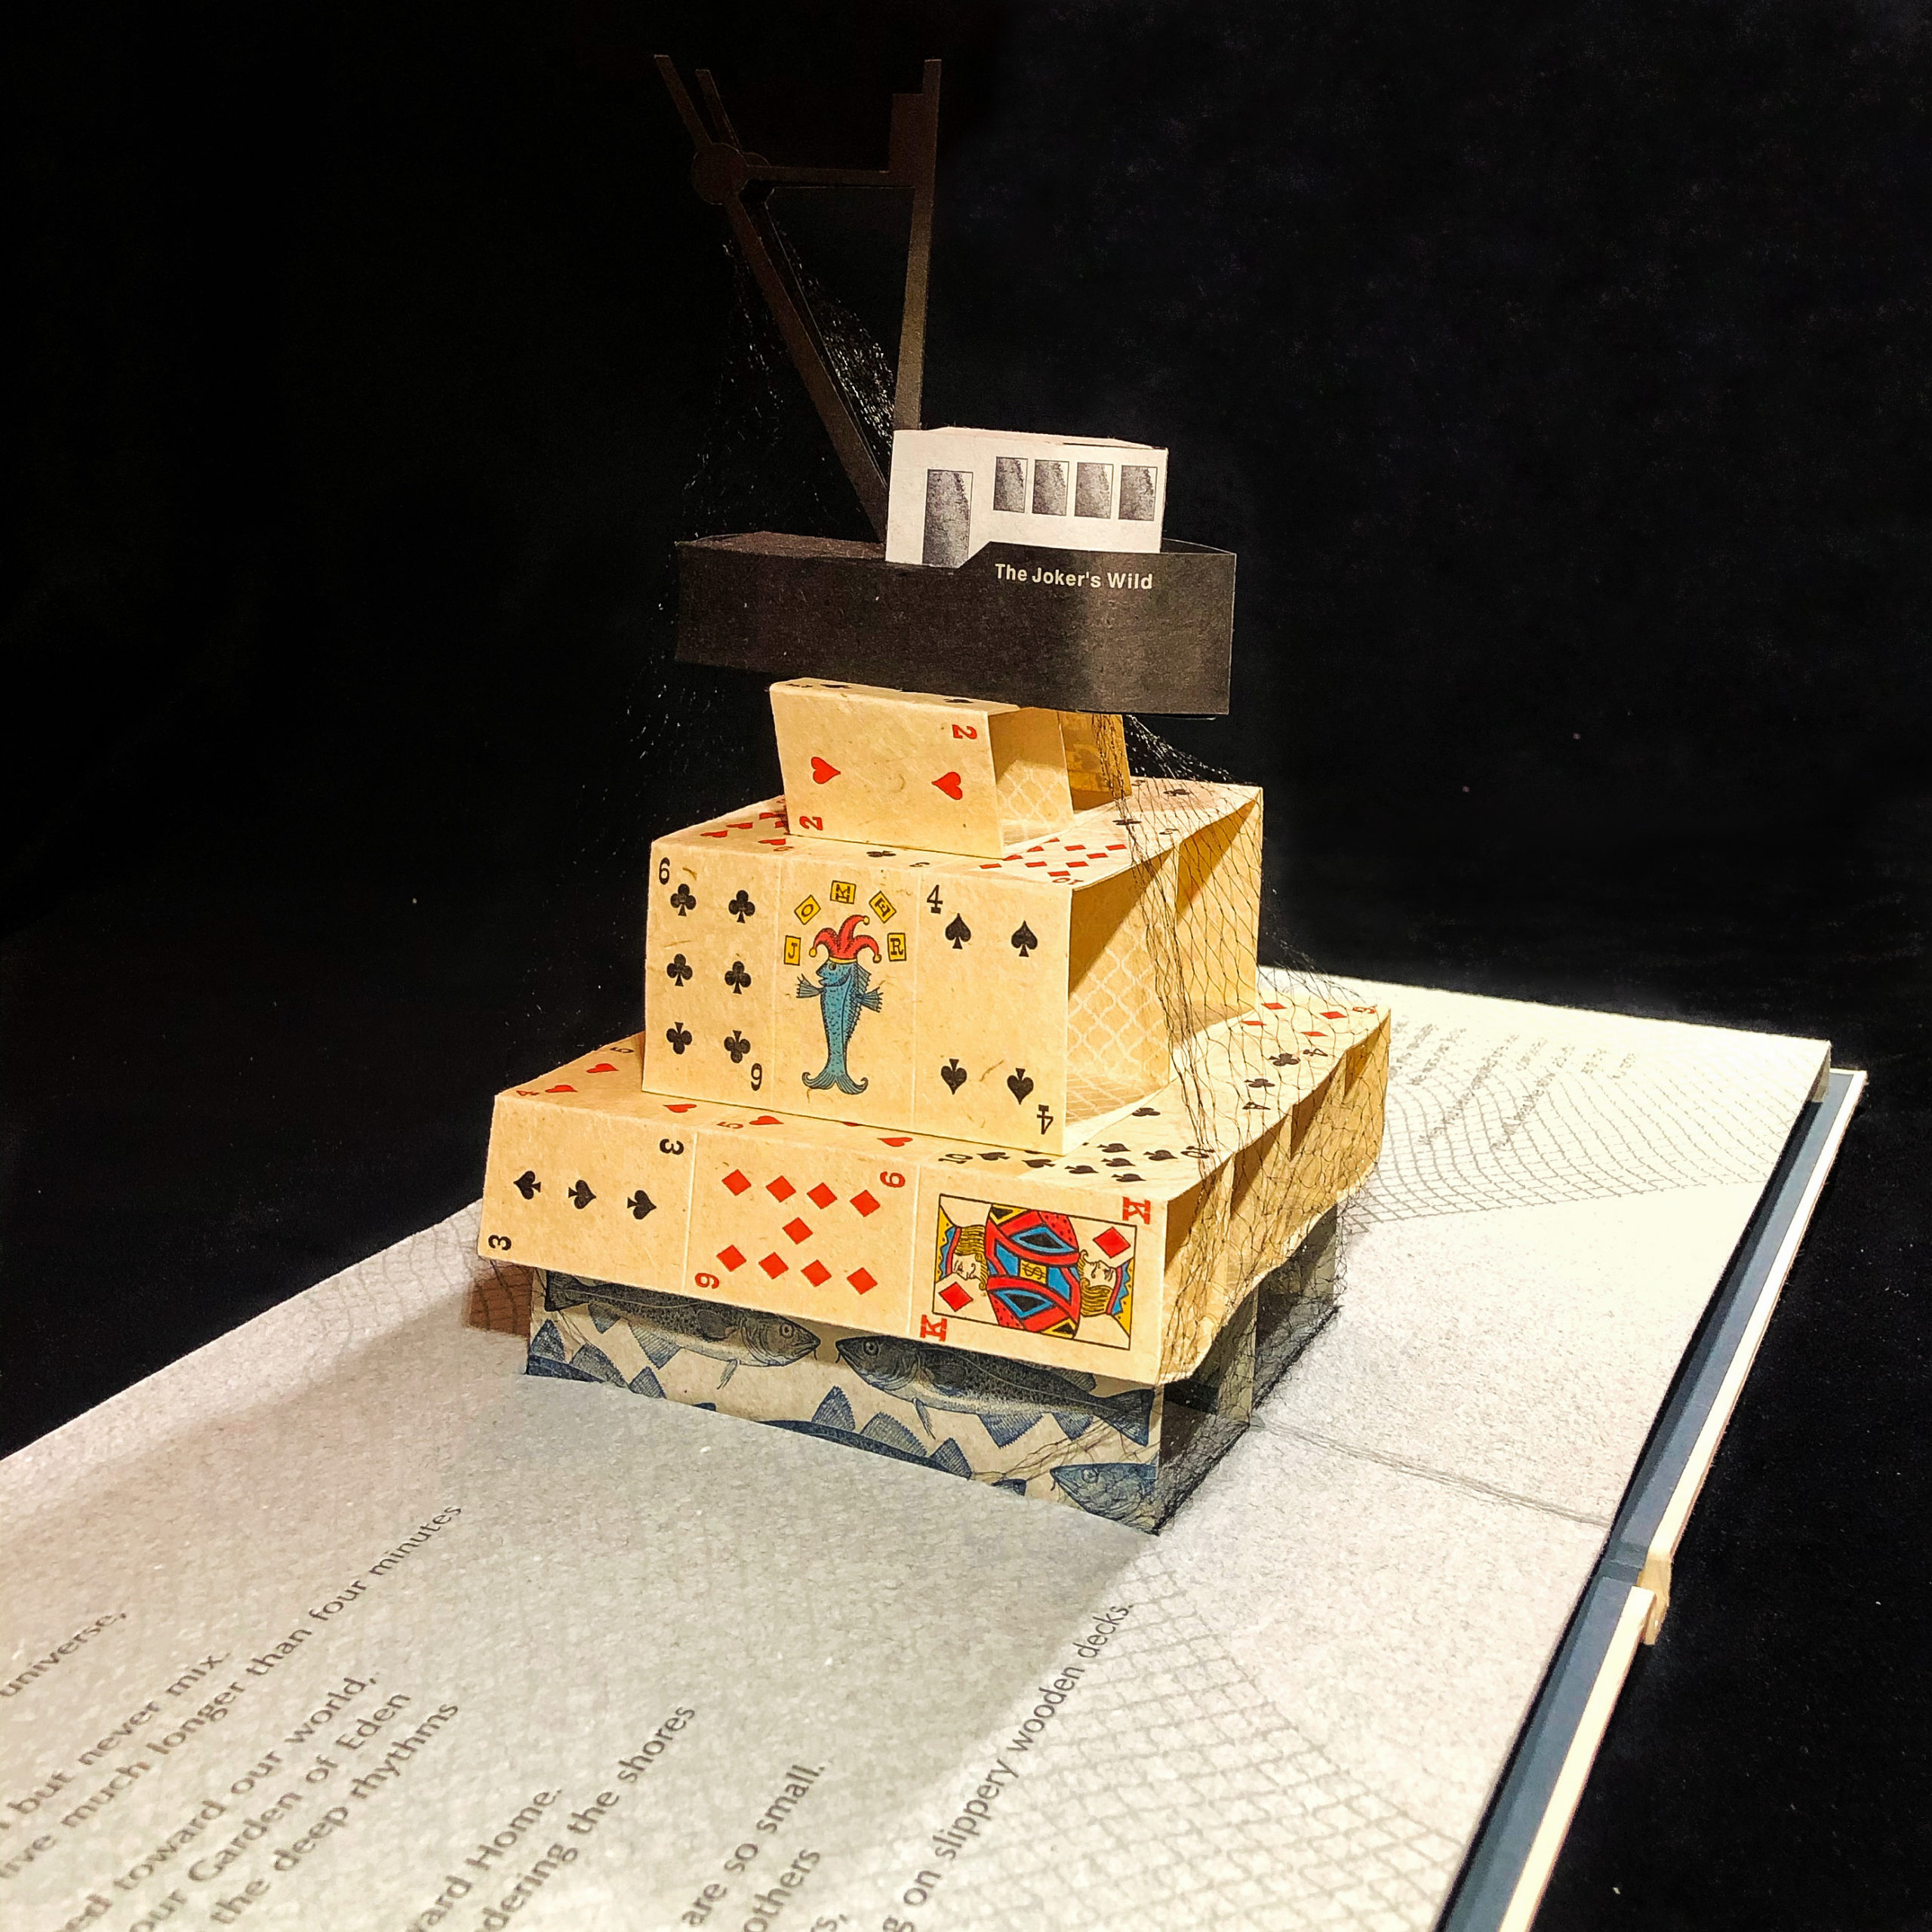 Image features a book opened to a pop-up paper construction of a black and white fishing trawler balanced on a house of cards decorated with playing card suits and a fish-as-joker motif, and images of fishes, all resting on a page spread printed with the netting and the poem "House of Cods."